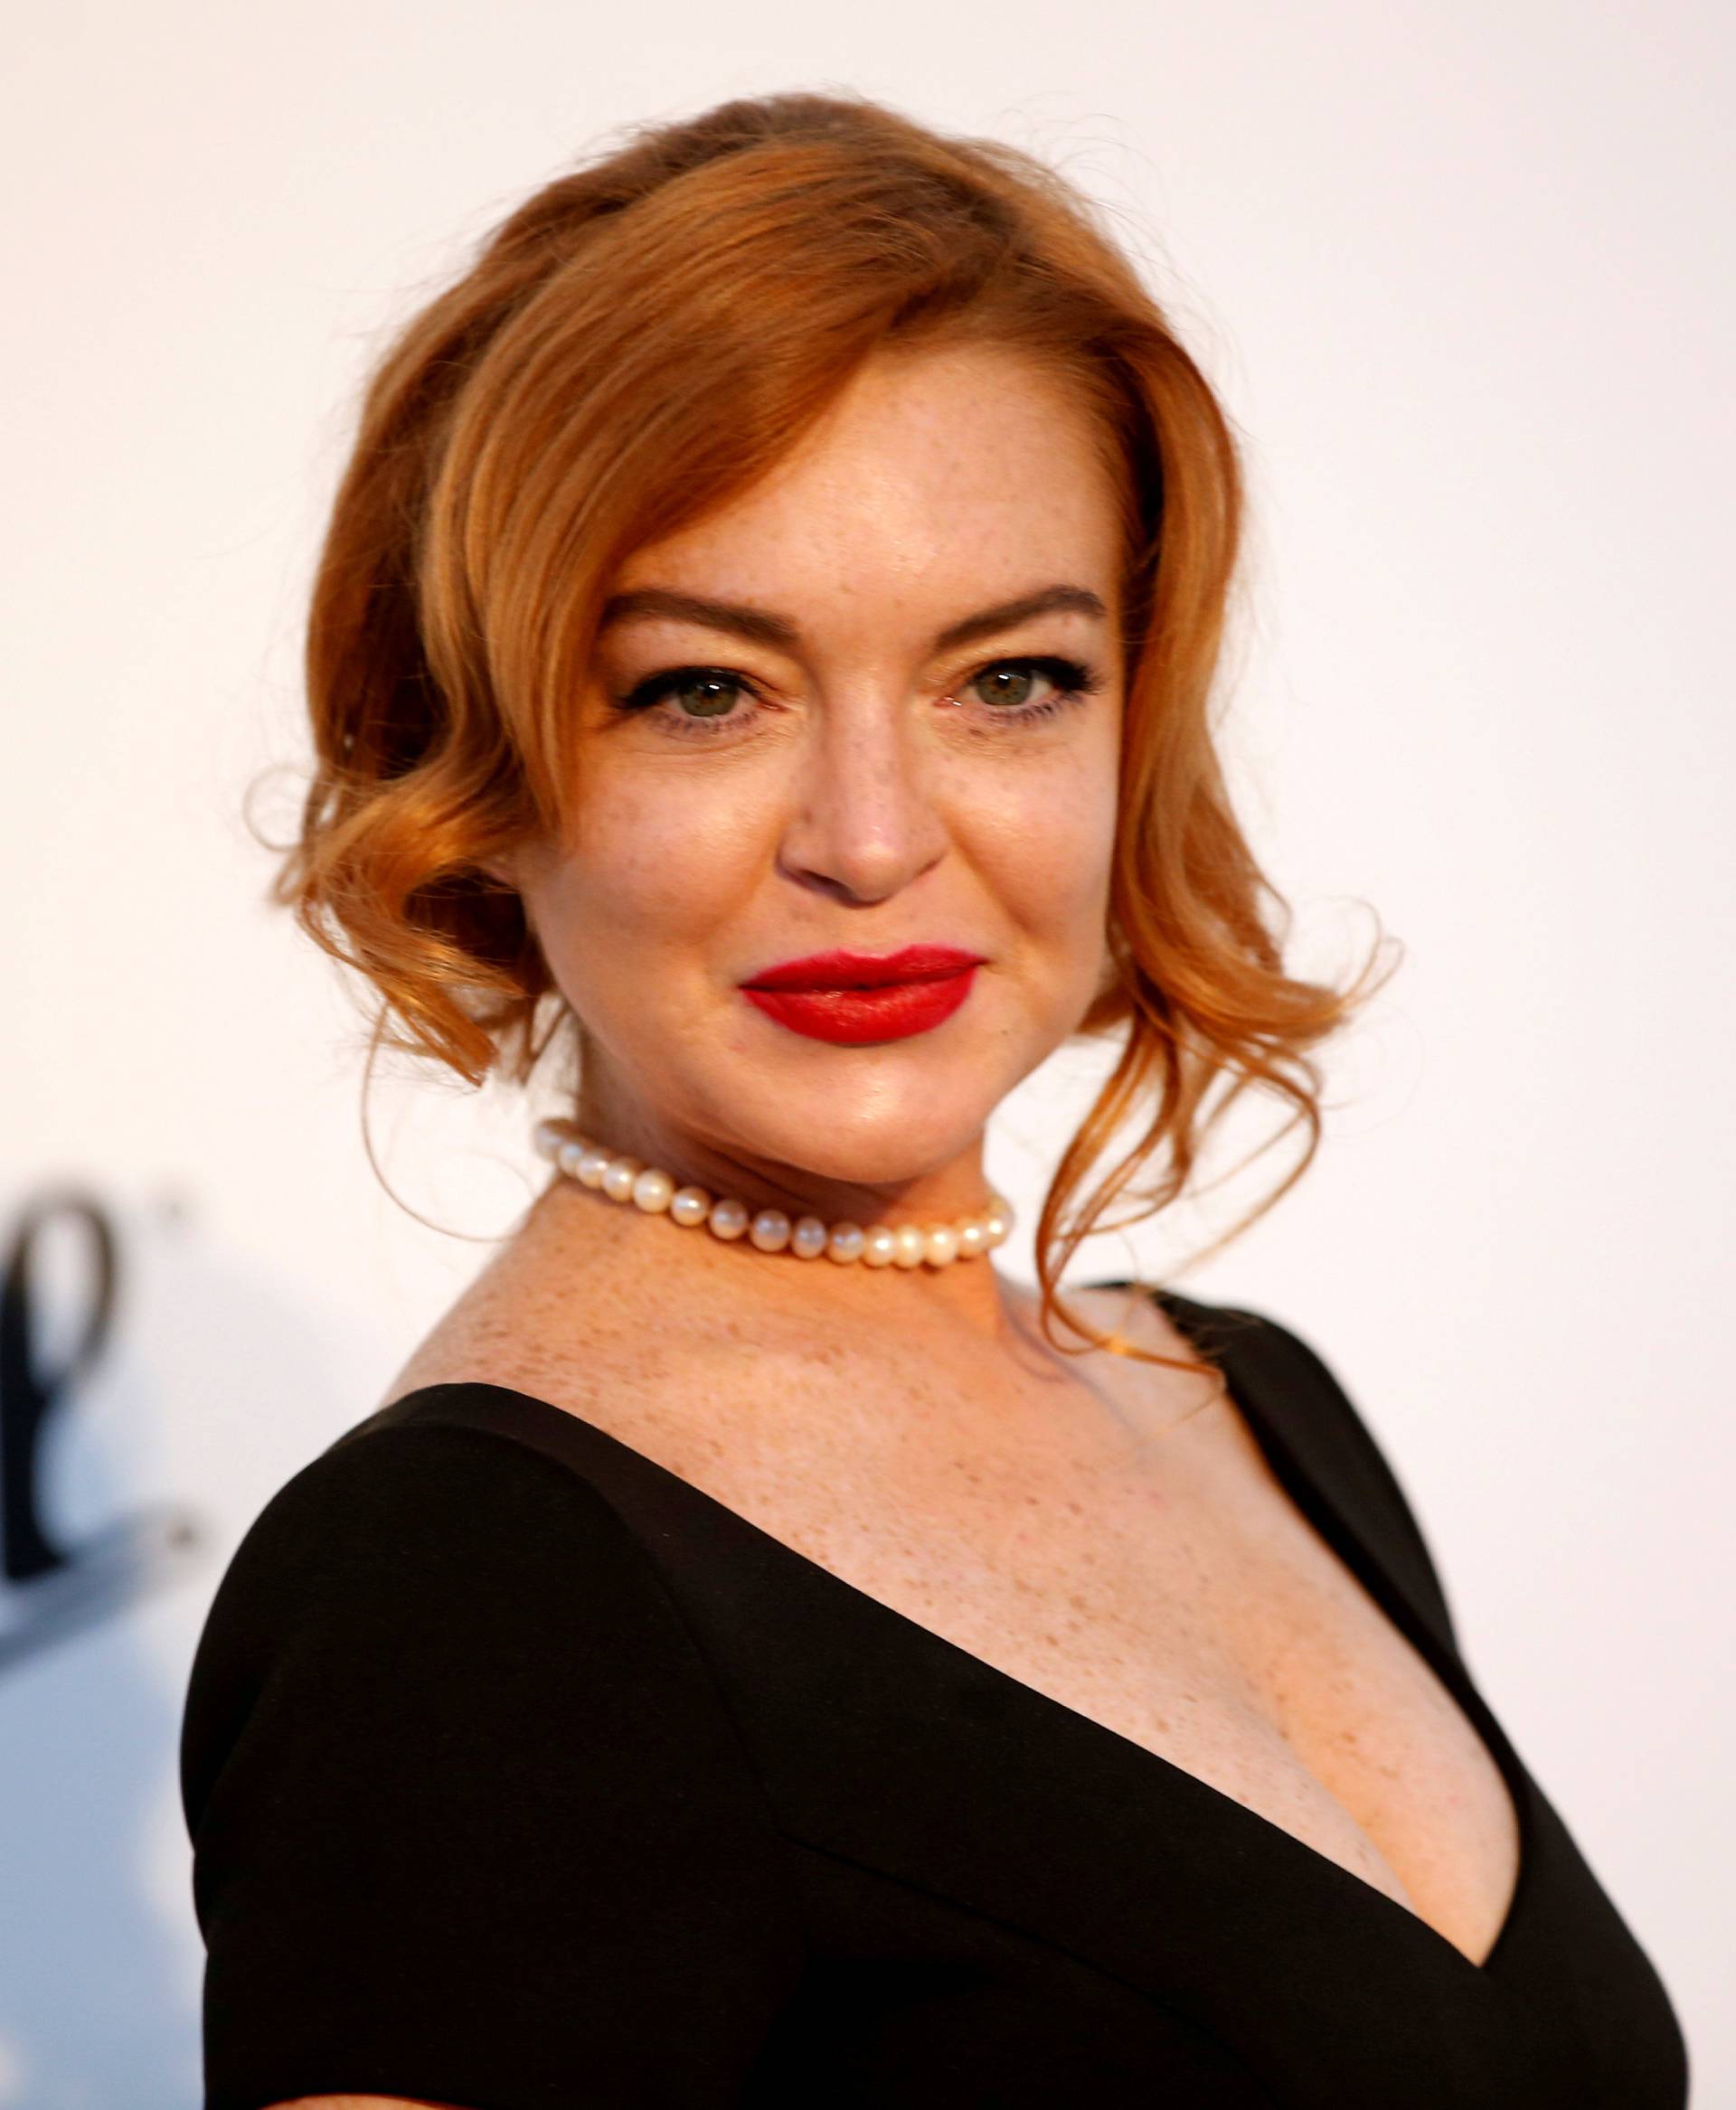 FILE PHOTO: Lindsay Lohan poses upon arrival at the 70th Cannes Film Festival The amfAR's Cinema Against AIDS 2017 event in Antibes